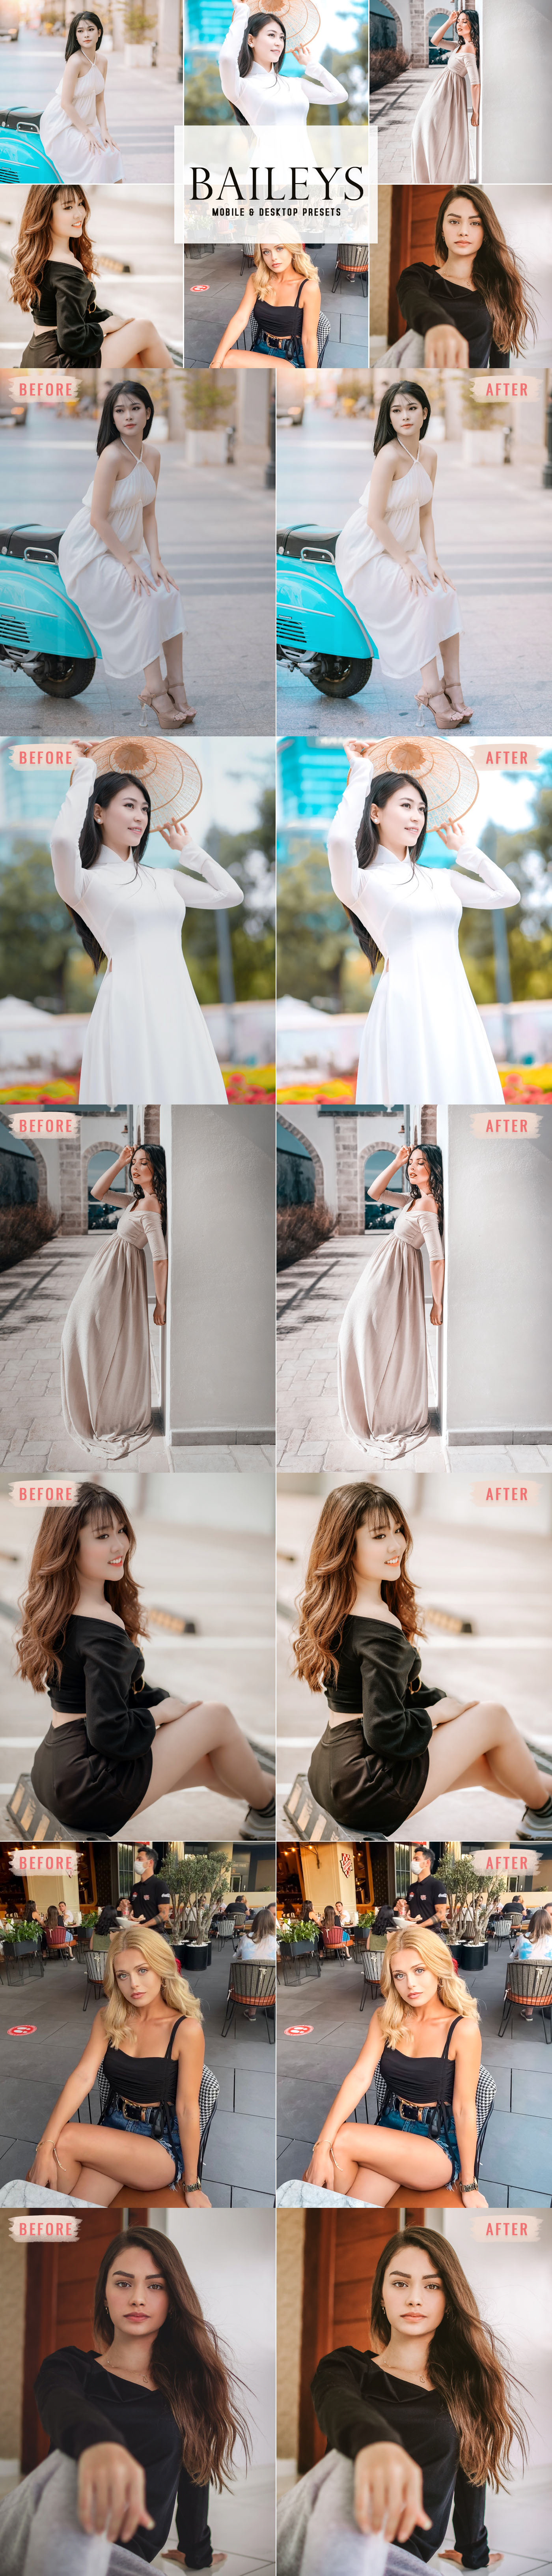 It contains 13 high quality photo editing filters that will give you the desired look in 1-click.